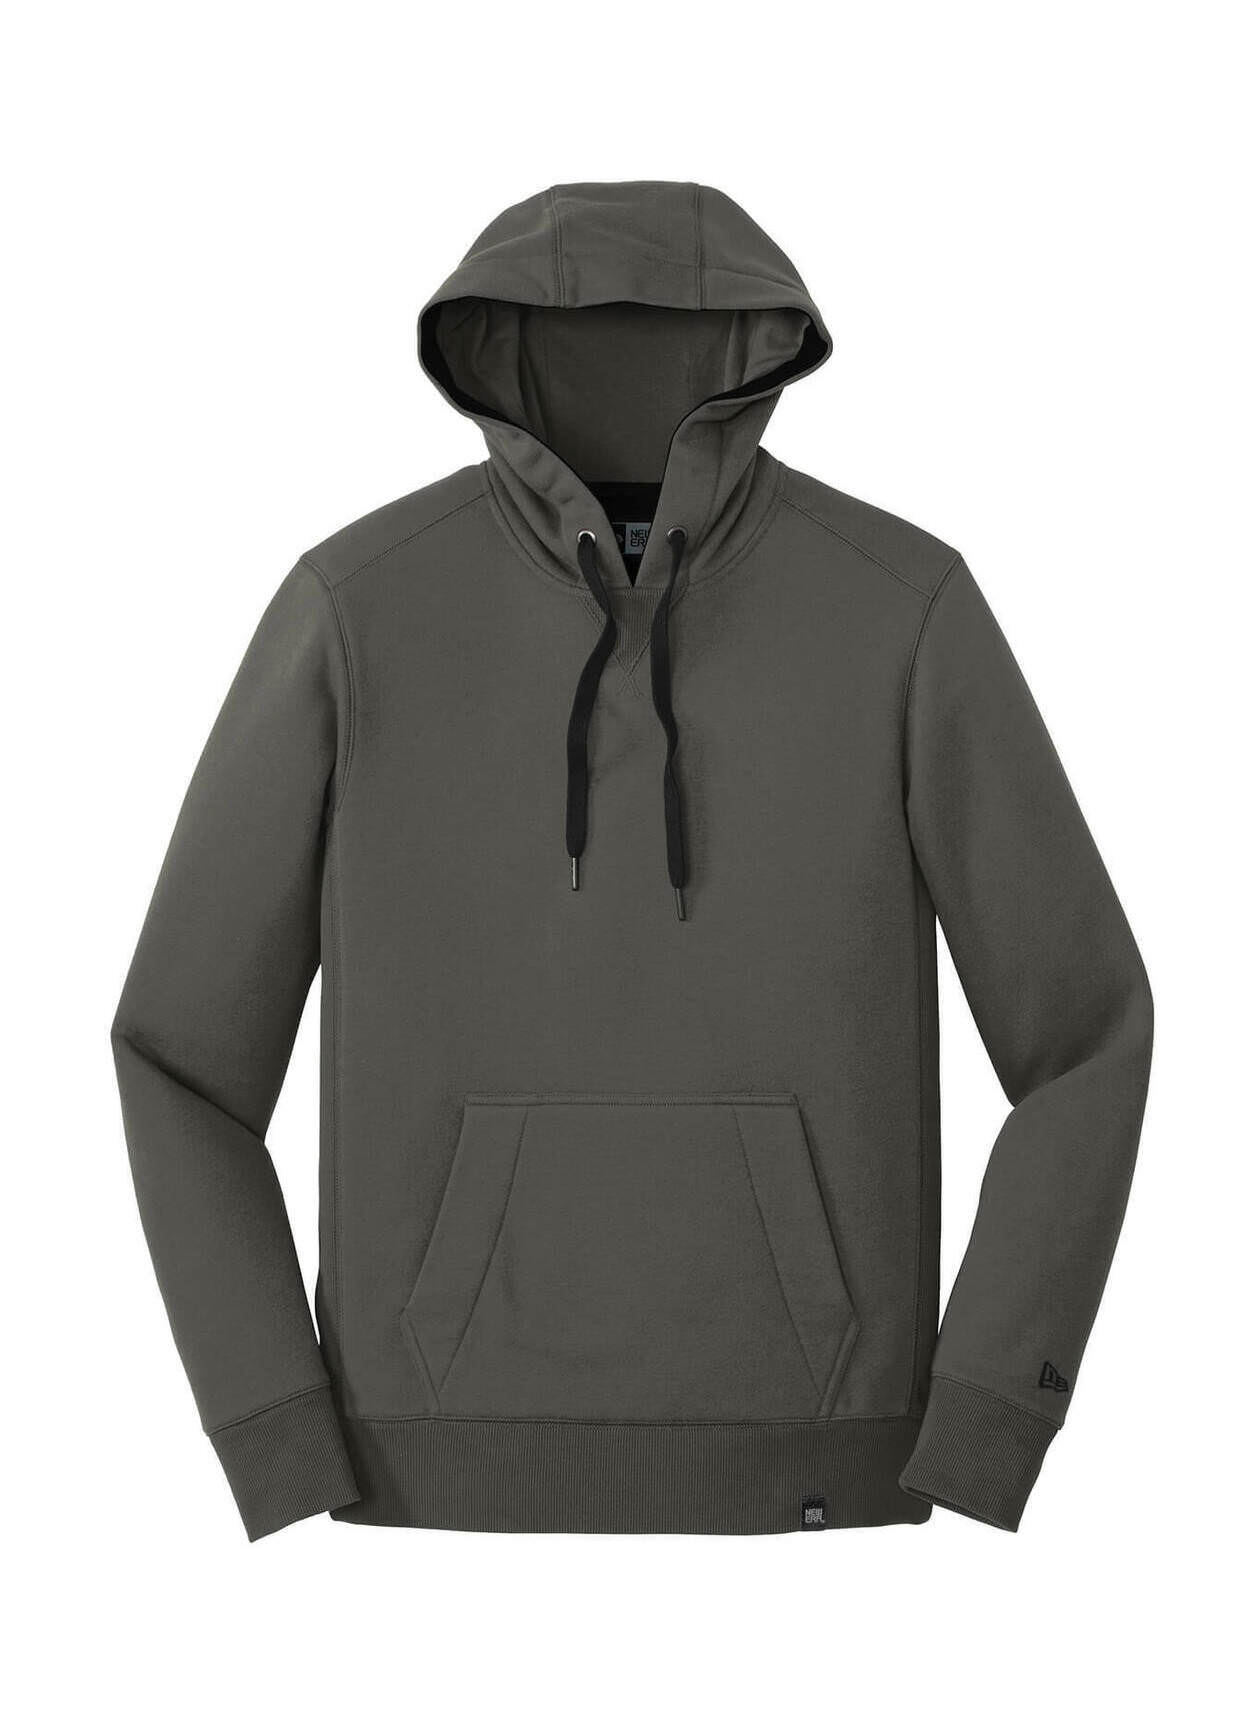 New Era Men's Graphite French Terry Pullover Hoodie